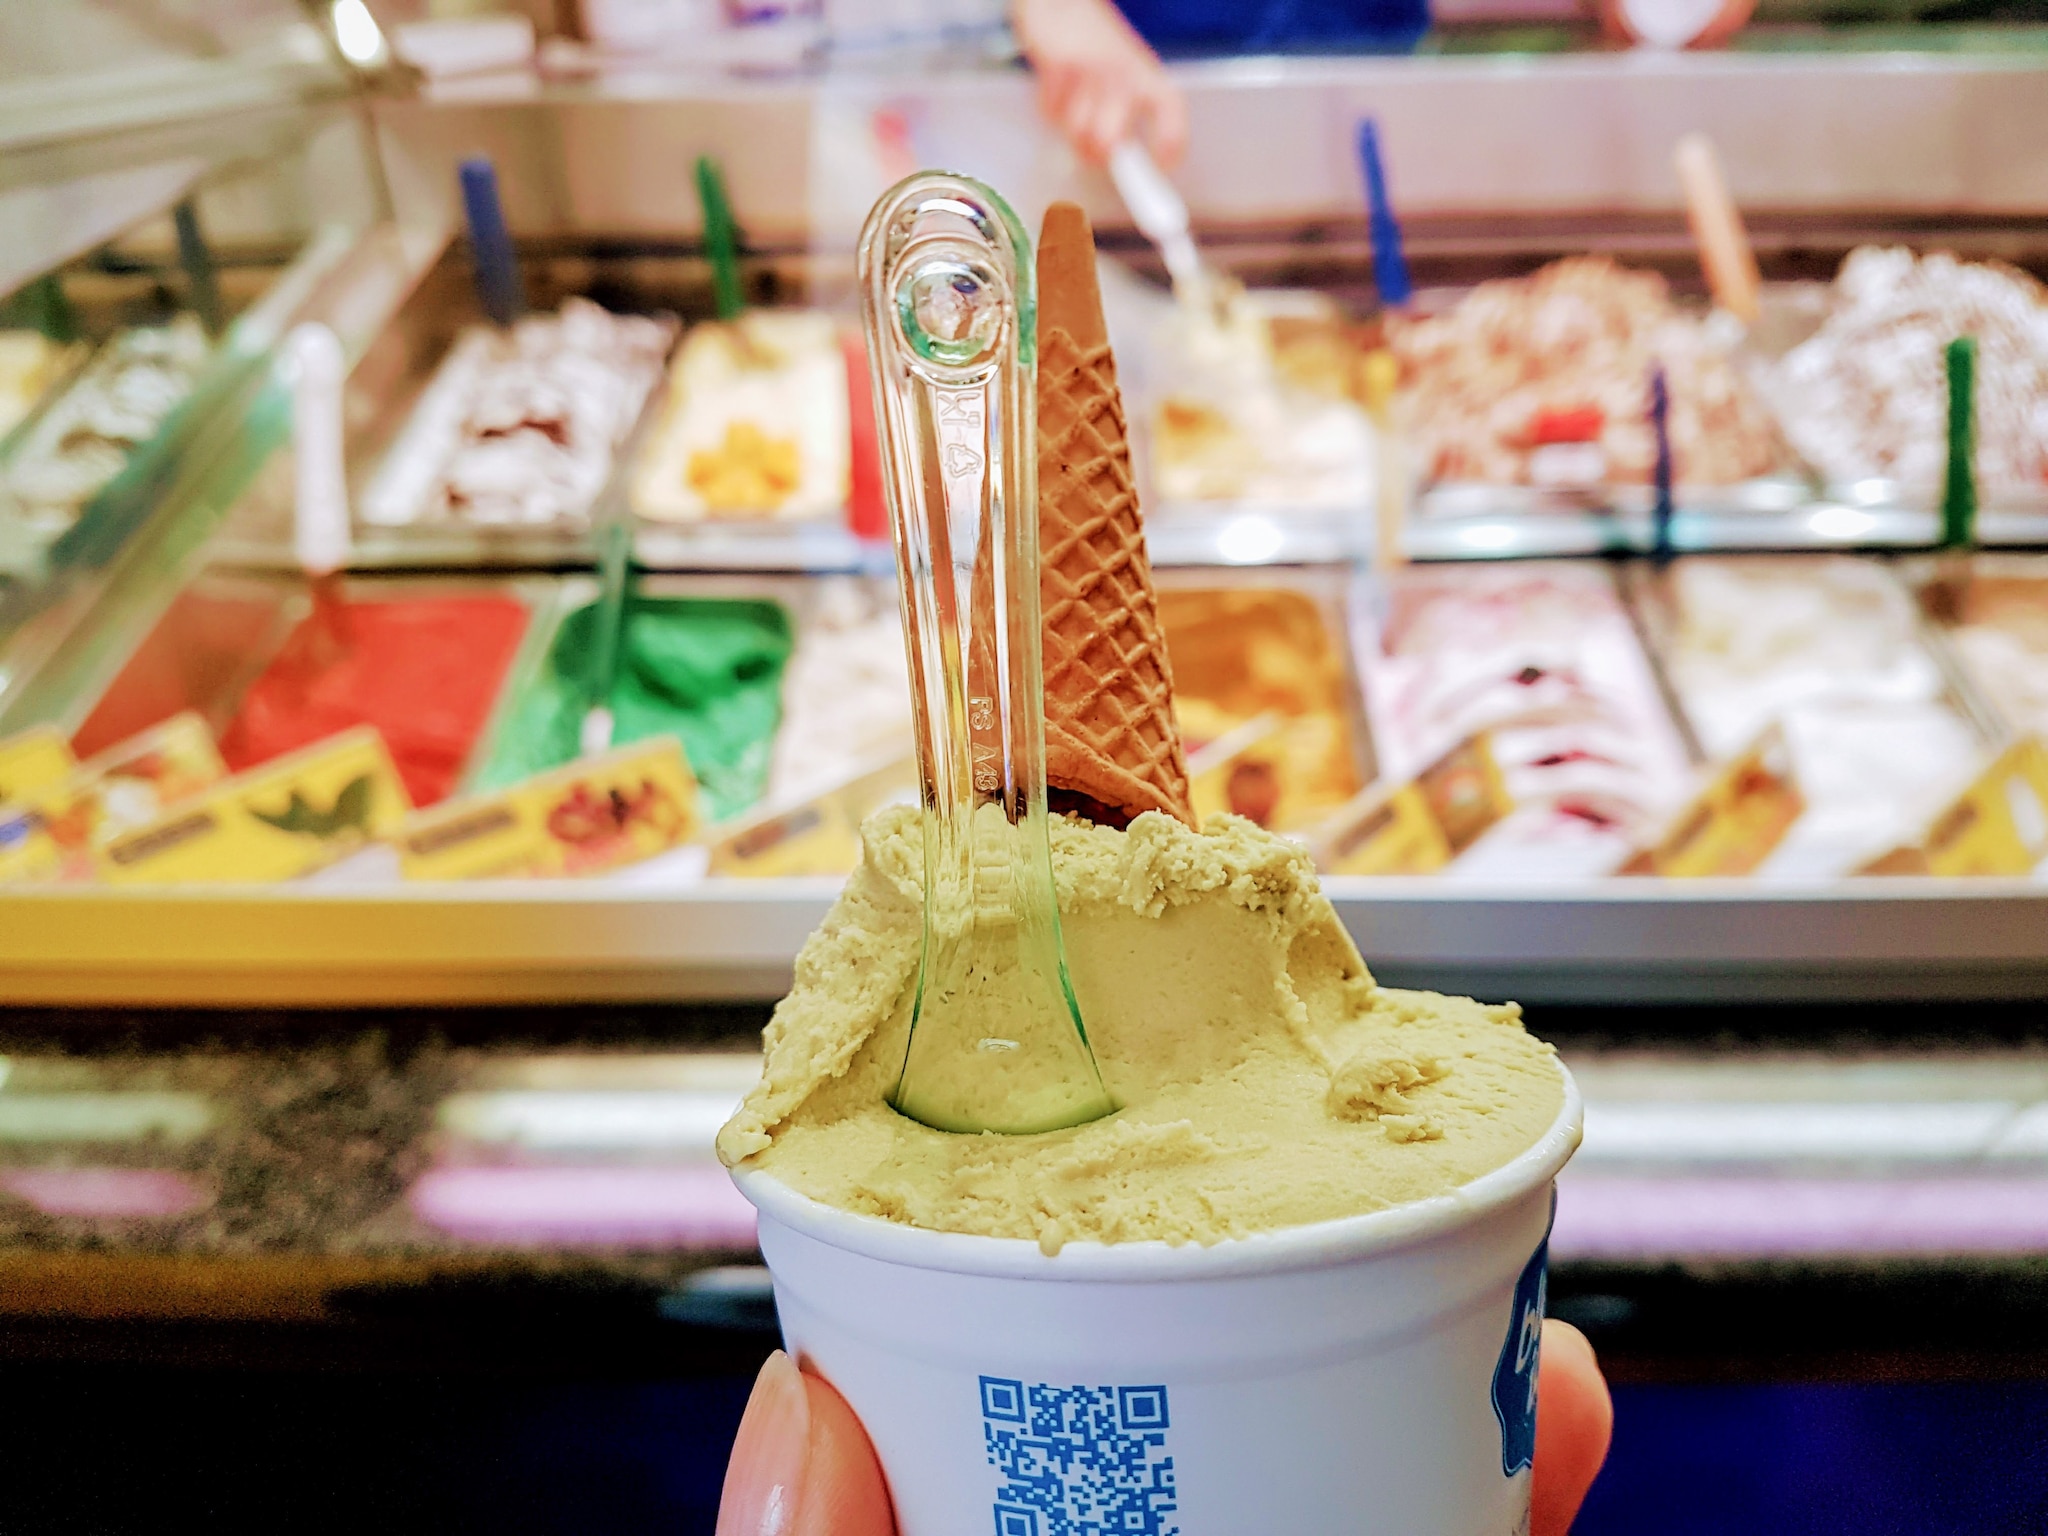 No 3. Mumbai Masti: Mumbai placed the highest order of fruit-based ice creams, tender coconut and mango ice creams are the city's go-to flavours.